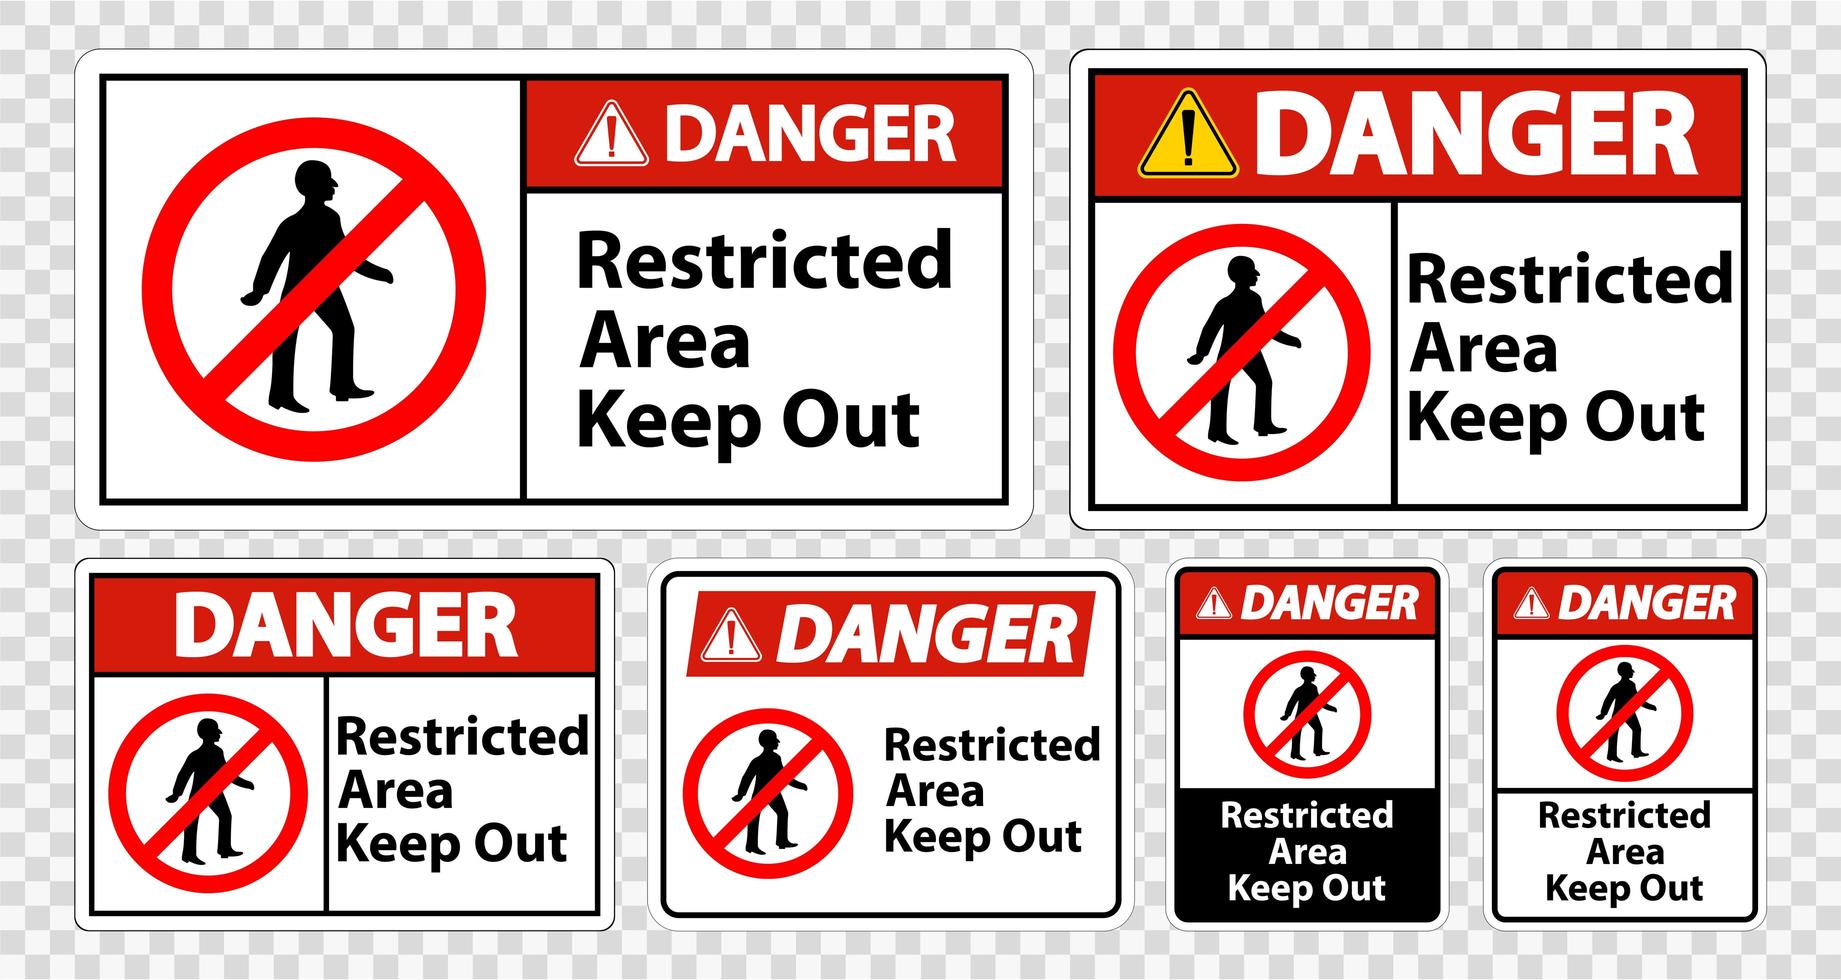 Danger Restricted Area Keep Out Signs  vector